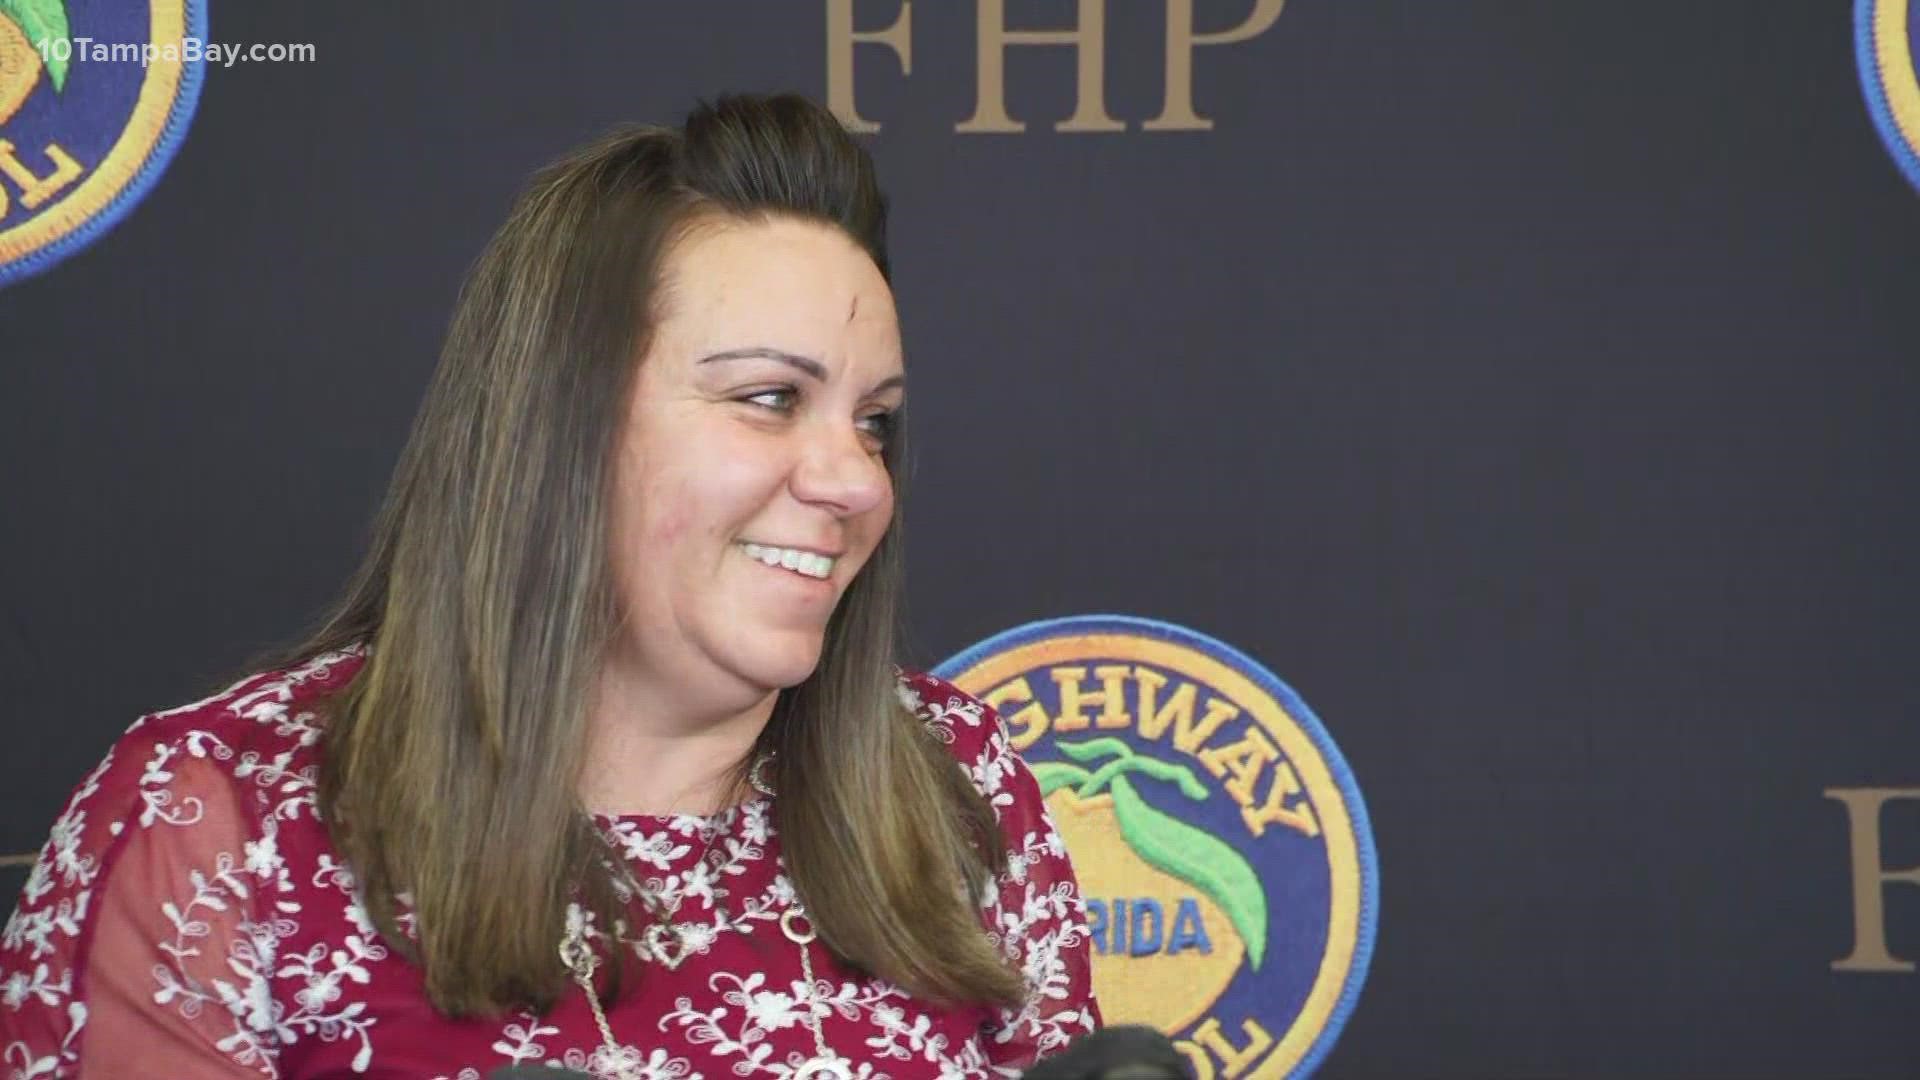 FHP Trooper Schuck said she "was sworn to protect and that's what I felt I did."